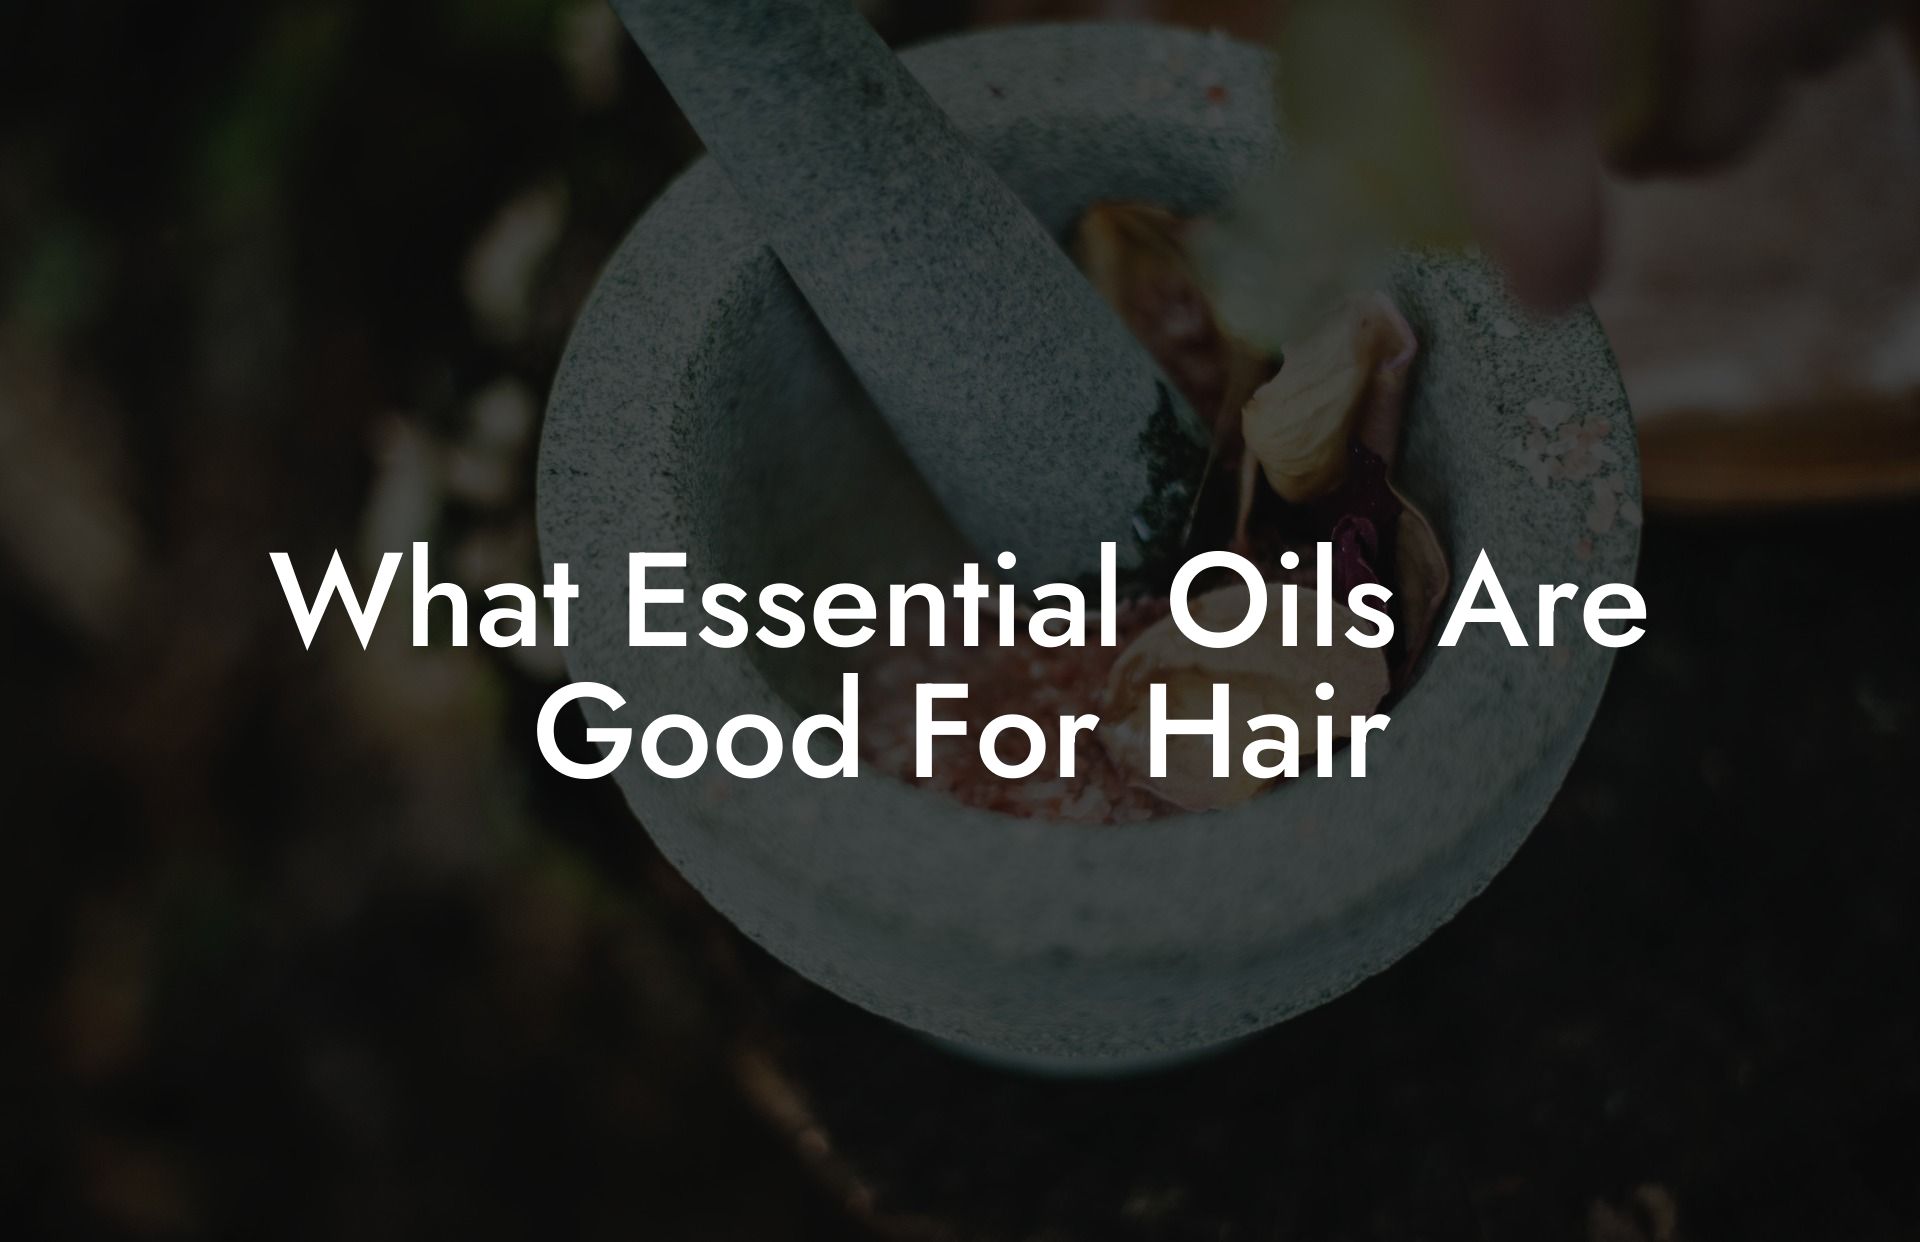 What Essential Oils Are Good For Hair